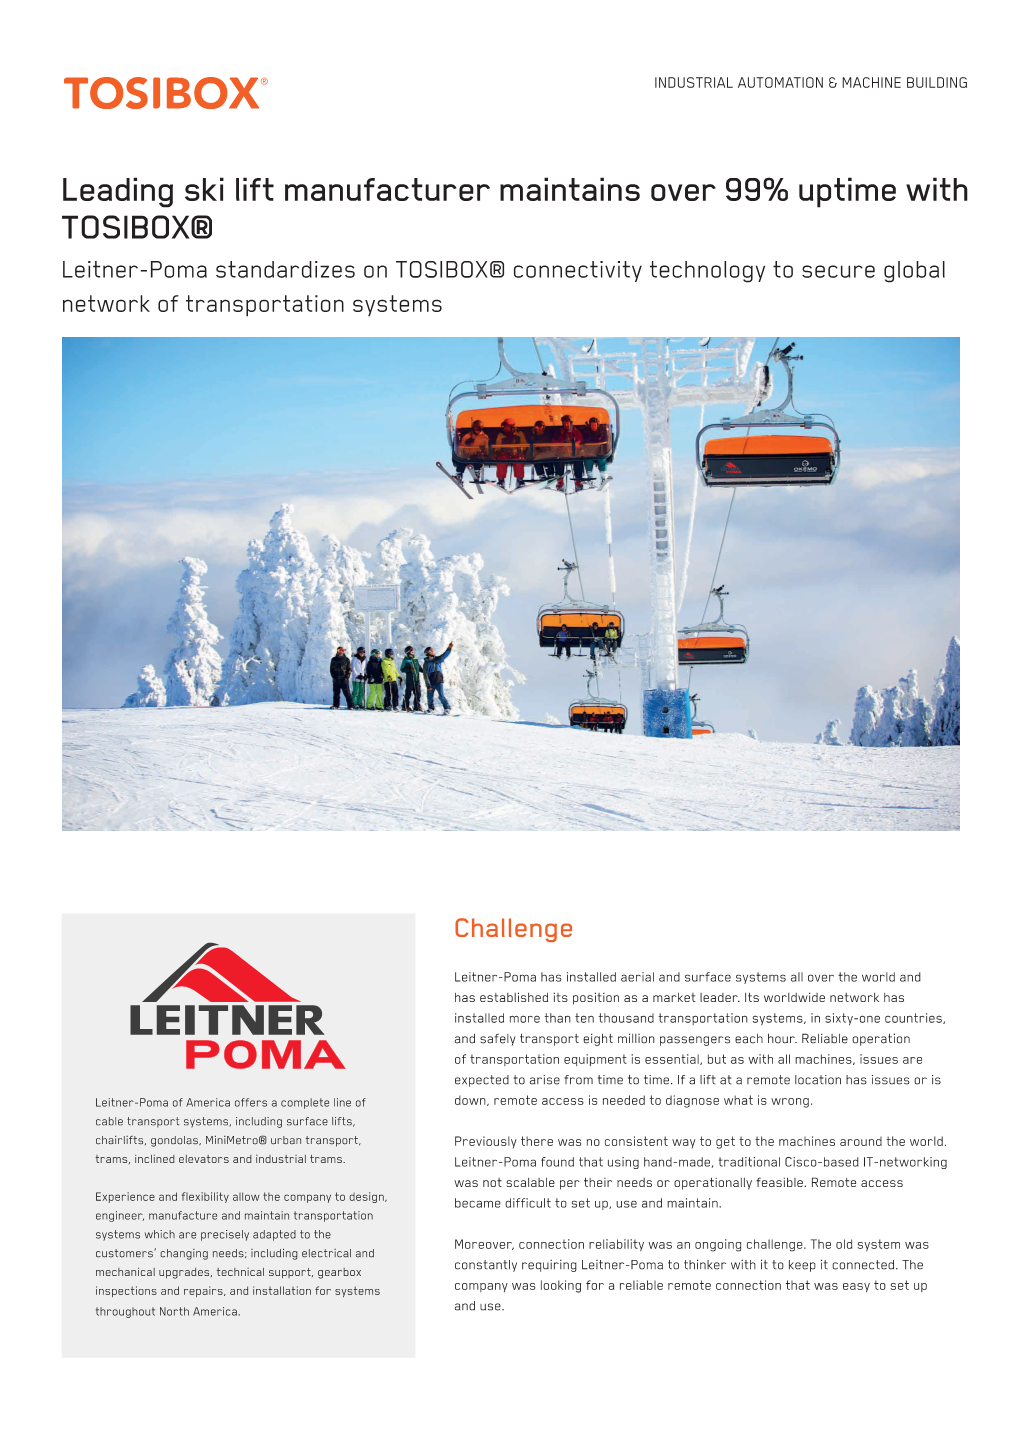 Leading Ski Lift Manufacturer Maintains Over 99% Uptime with TOSIBOX®